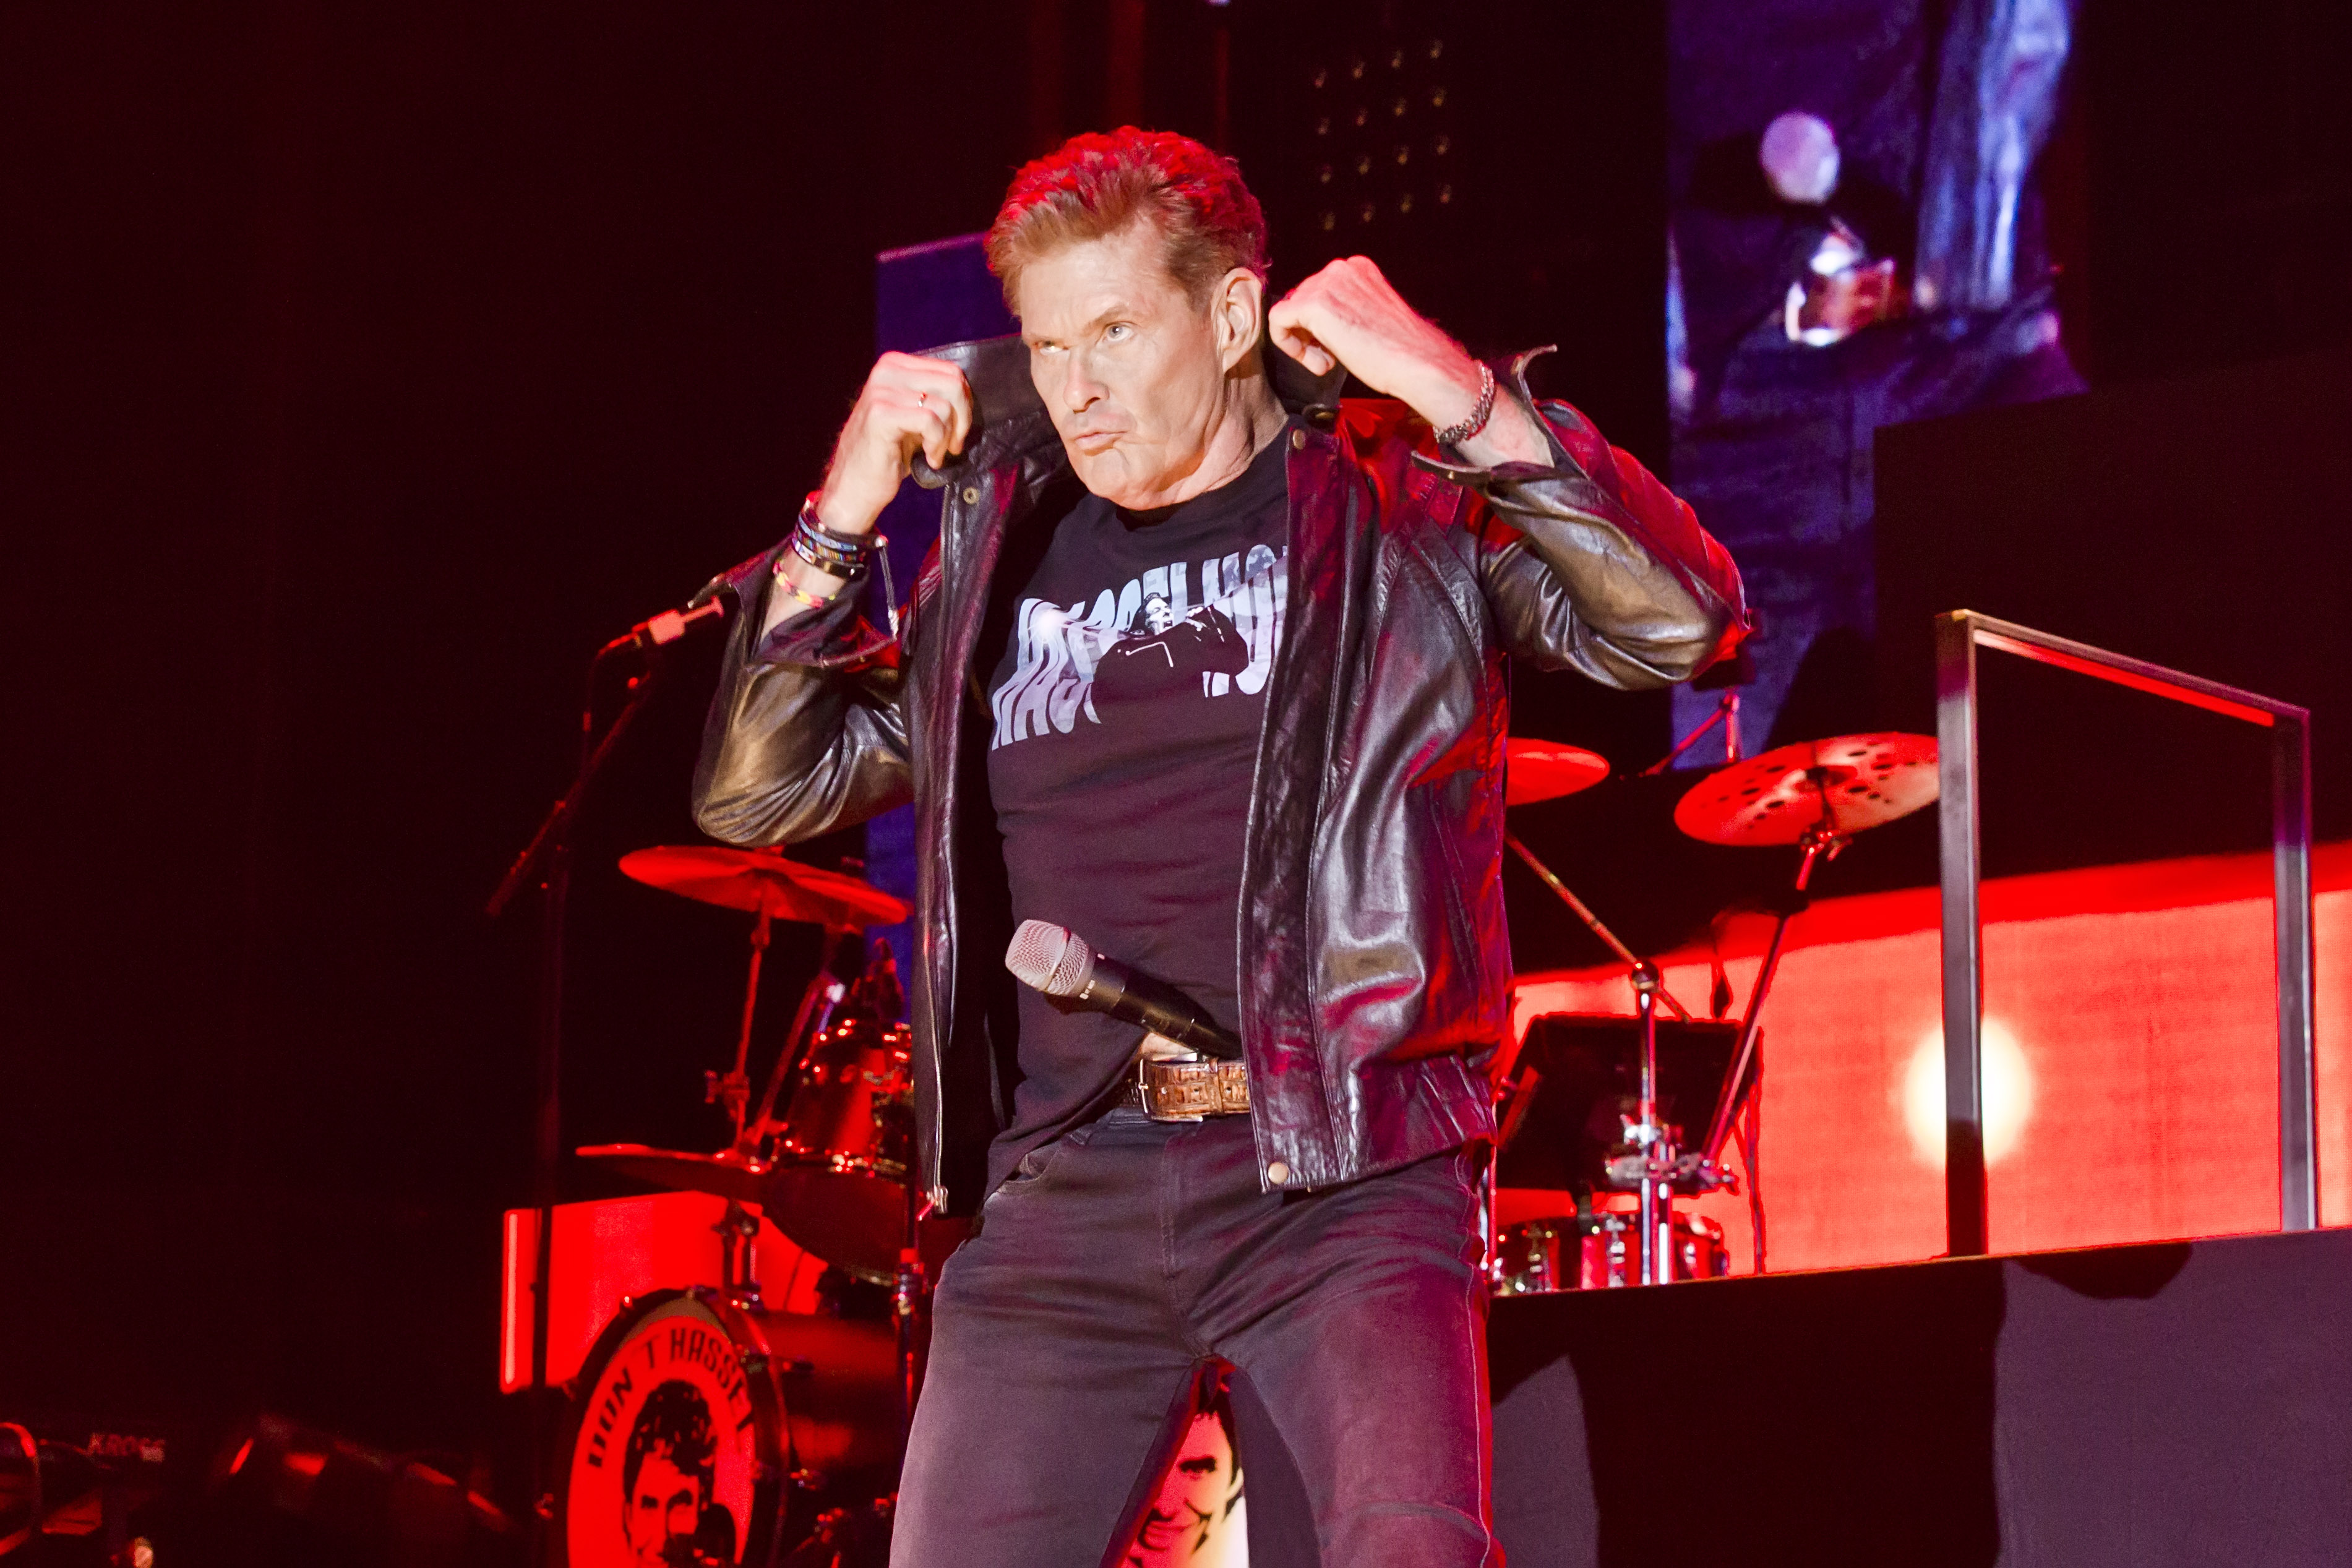 David Hasselhoff poses at a concert